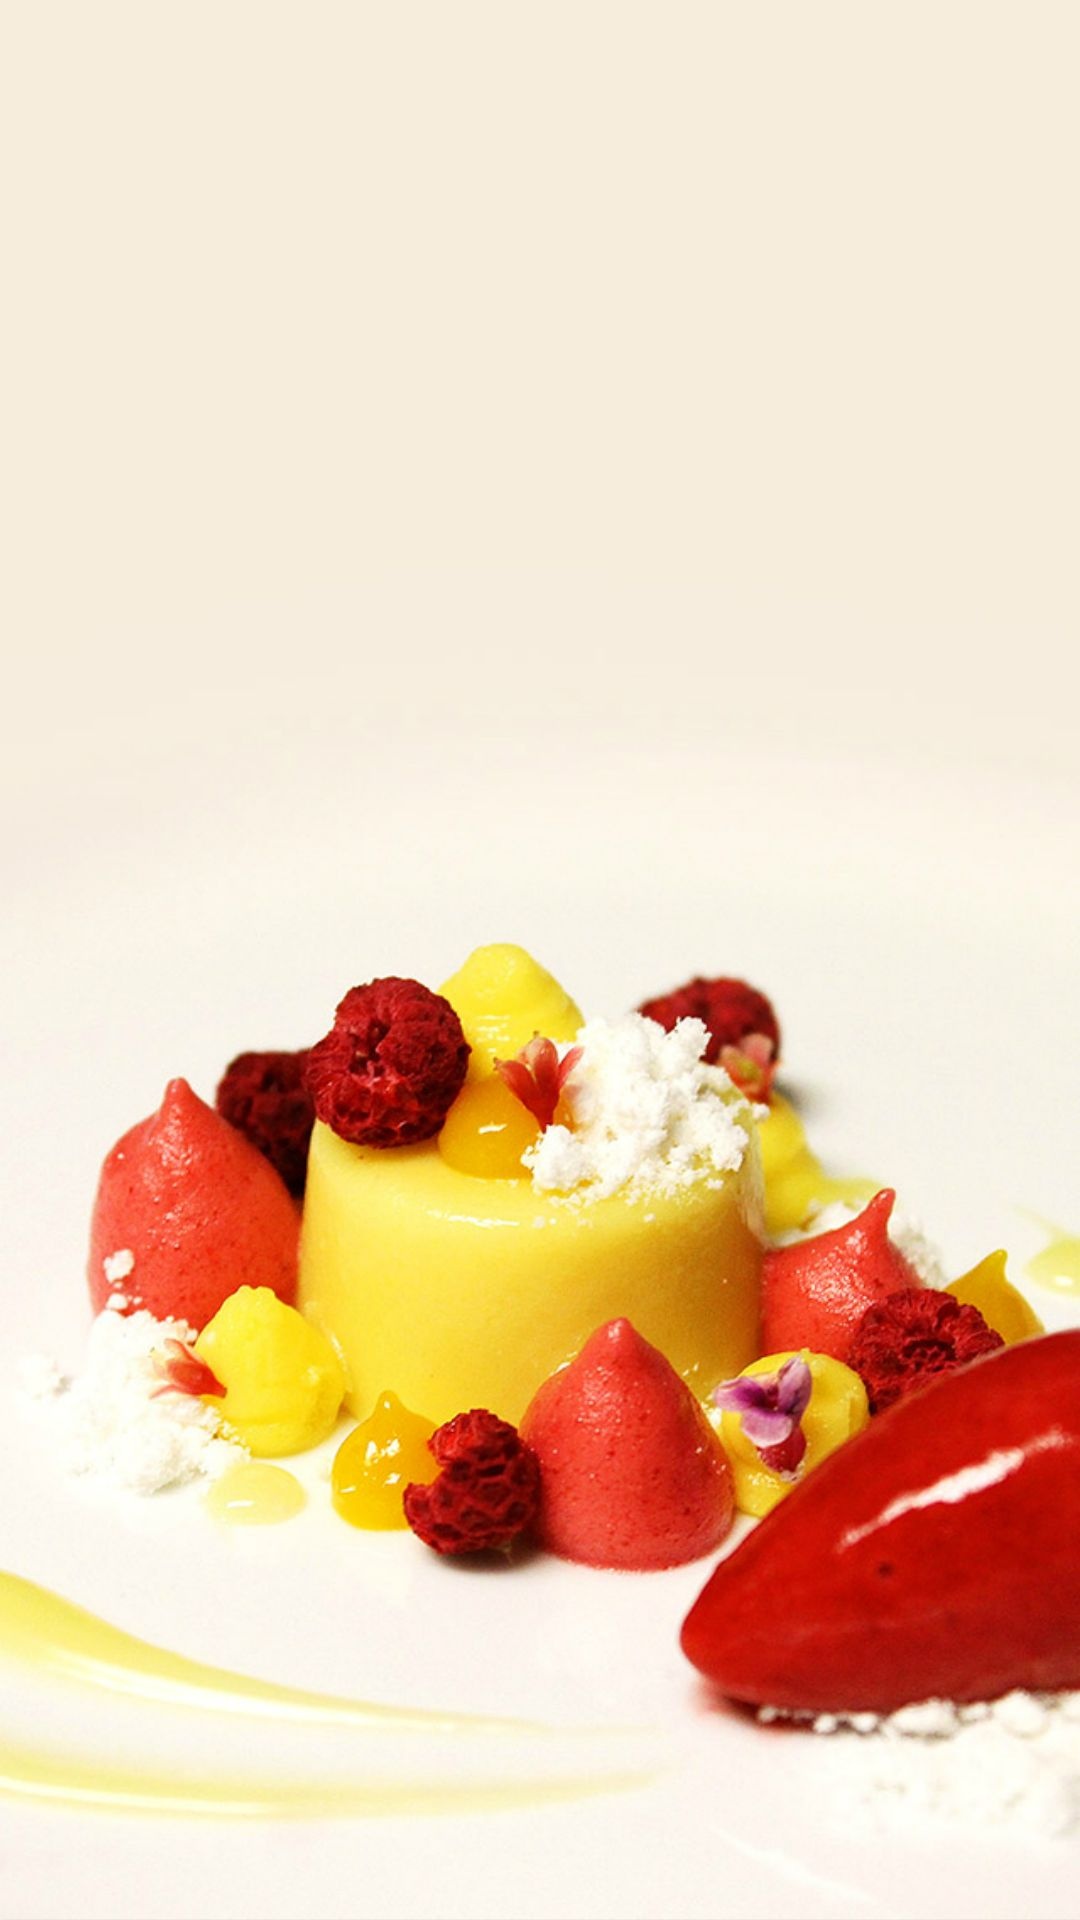 Yummy fruit pudding dessert, Colorful and refreshing, Delicious iPhone wallpaper, Tempting fruit treats, 1080x1920 Full HD Handy